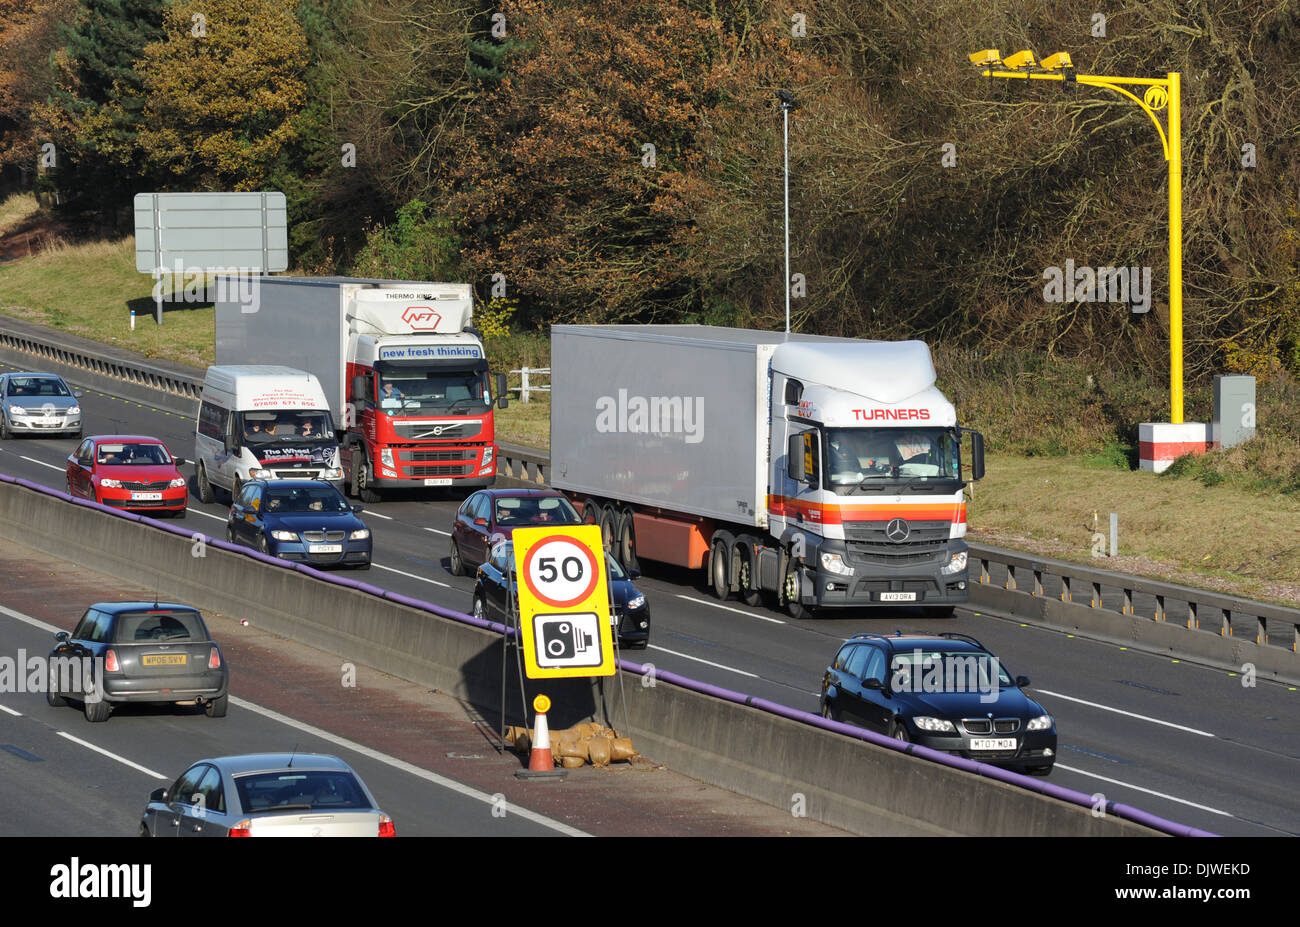 TRAFFIC TRAVELLING IN ROADWORKS SECTION OF THE M6 MOTORWAY WITH SPEED LIMIT 50MPH SIGN CAMERAS SAFETY MOBILE GATSO UK Stock Photo